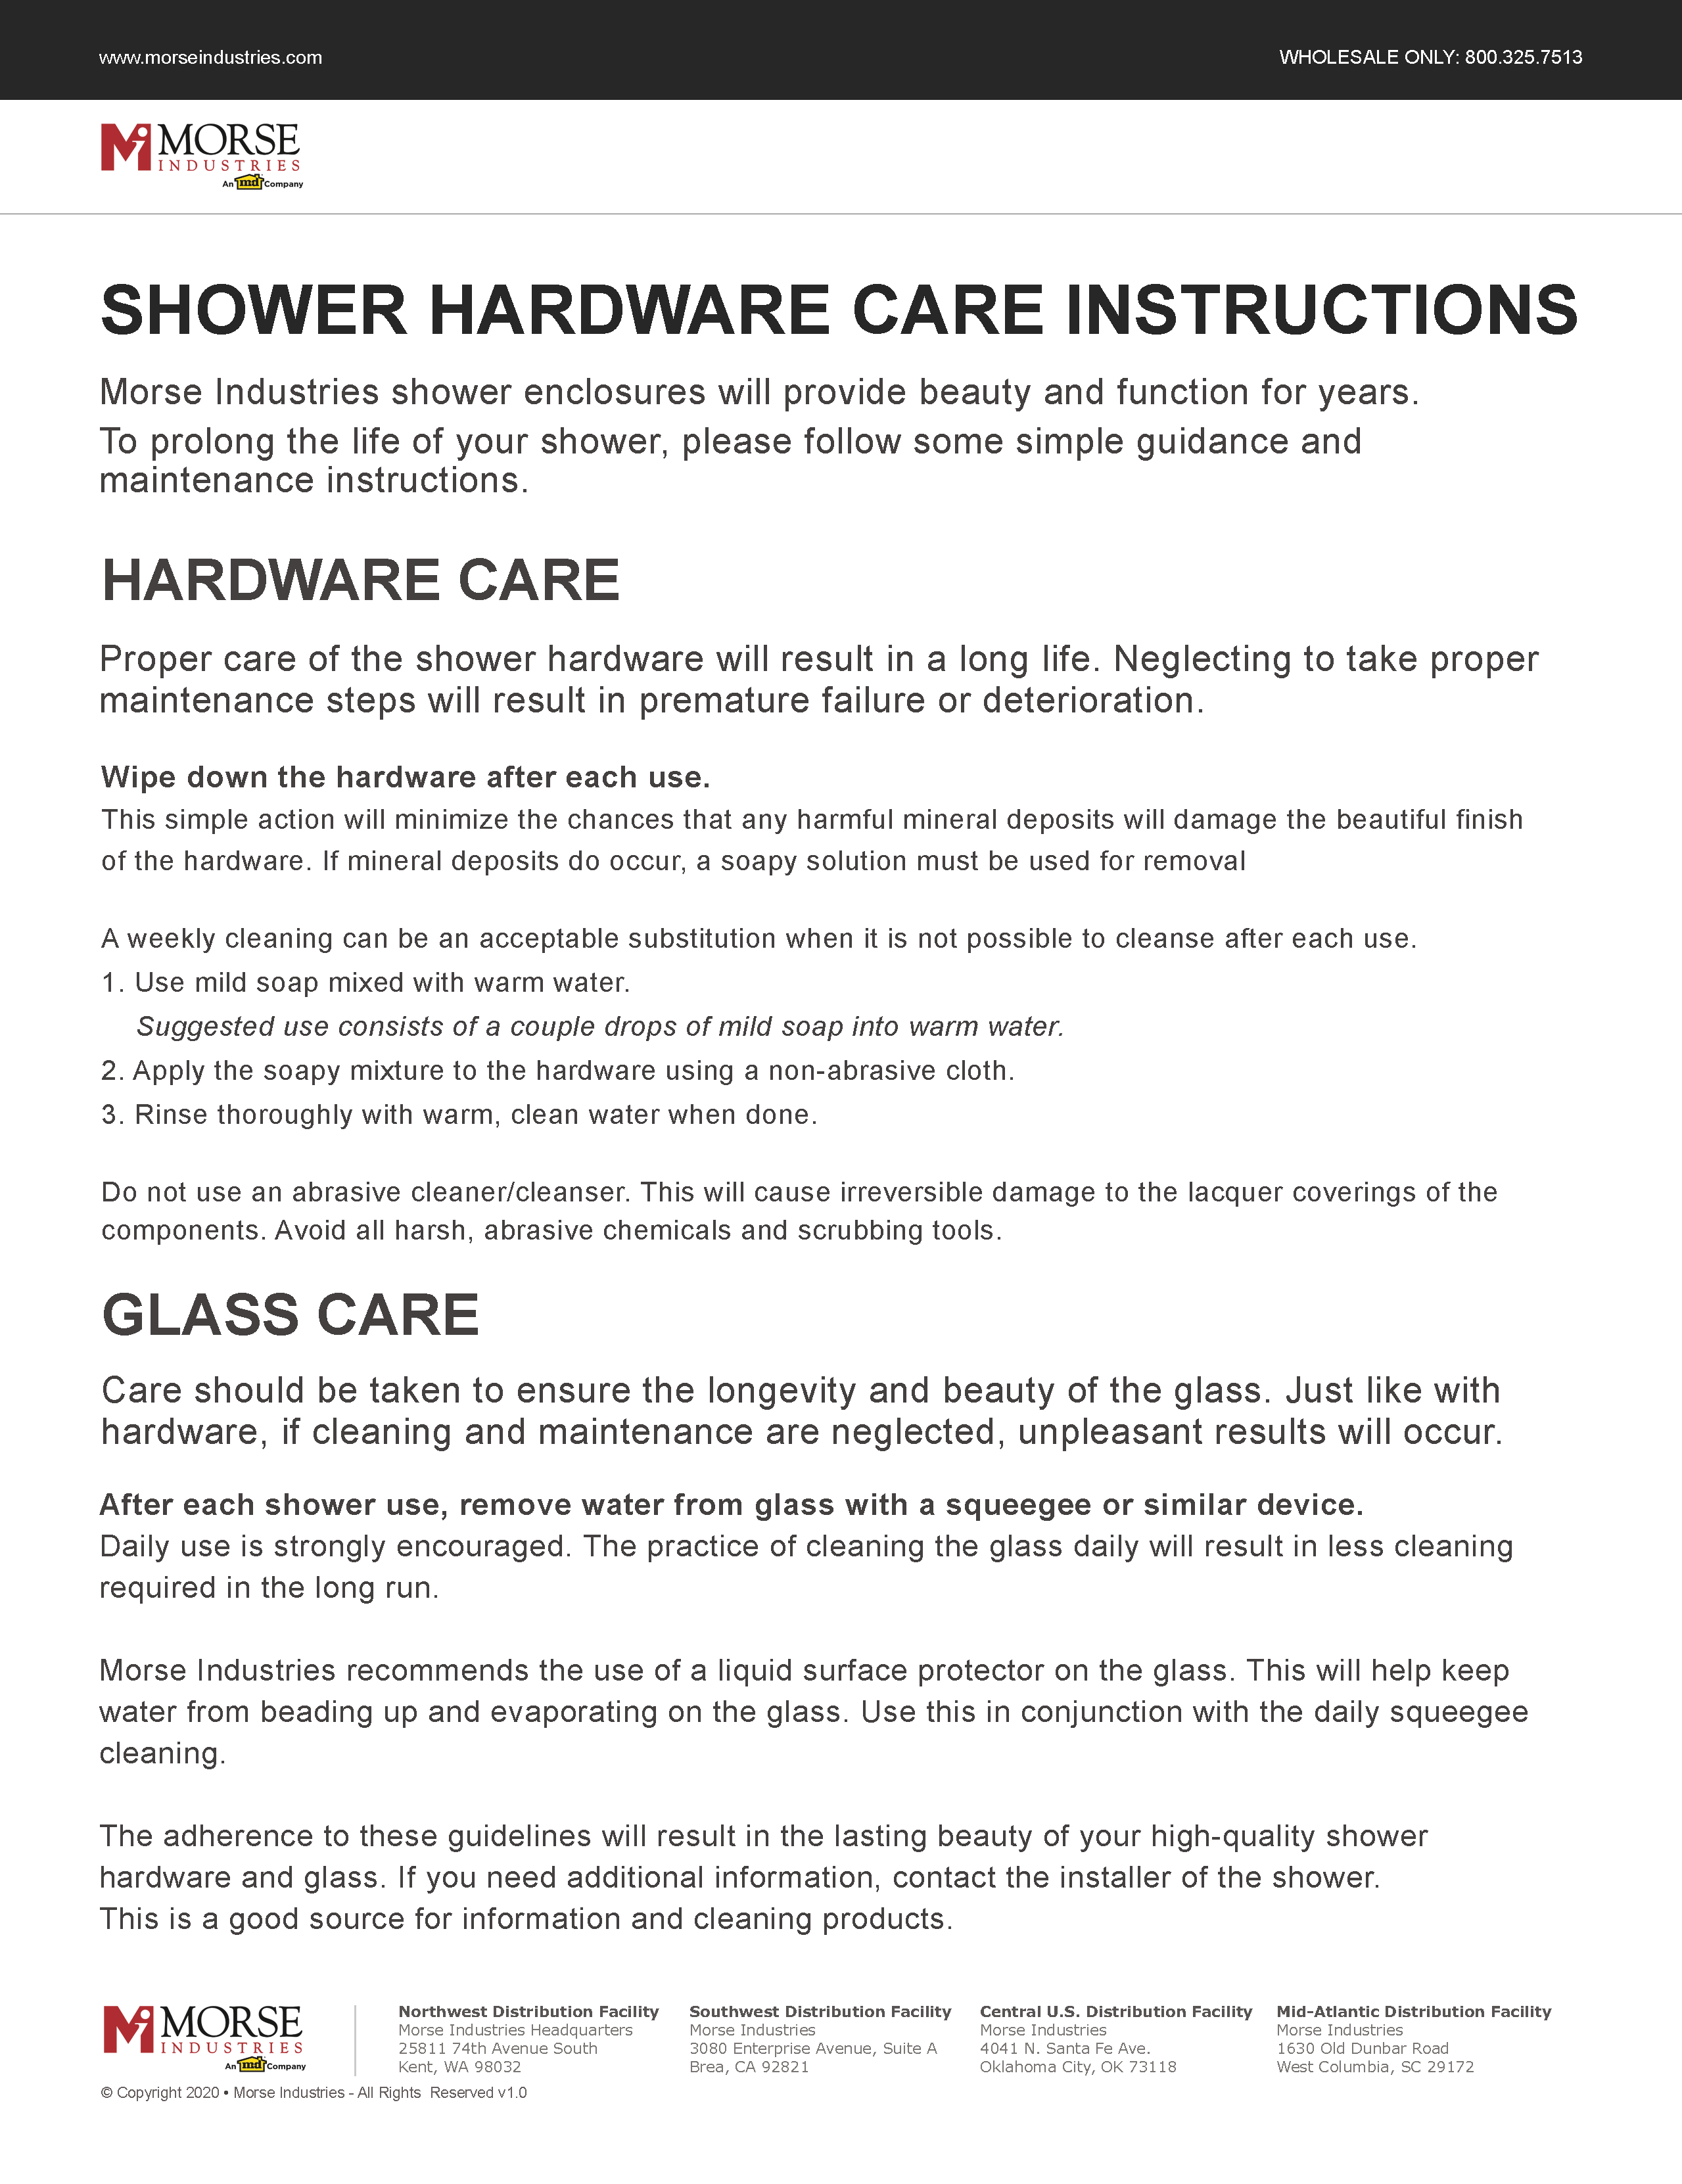 Shower Care Instructions